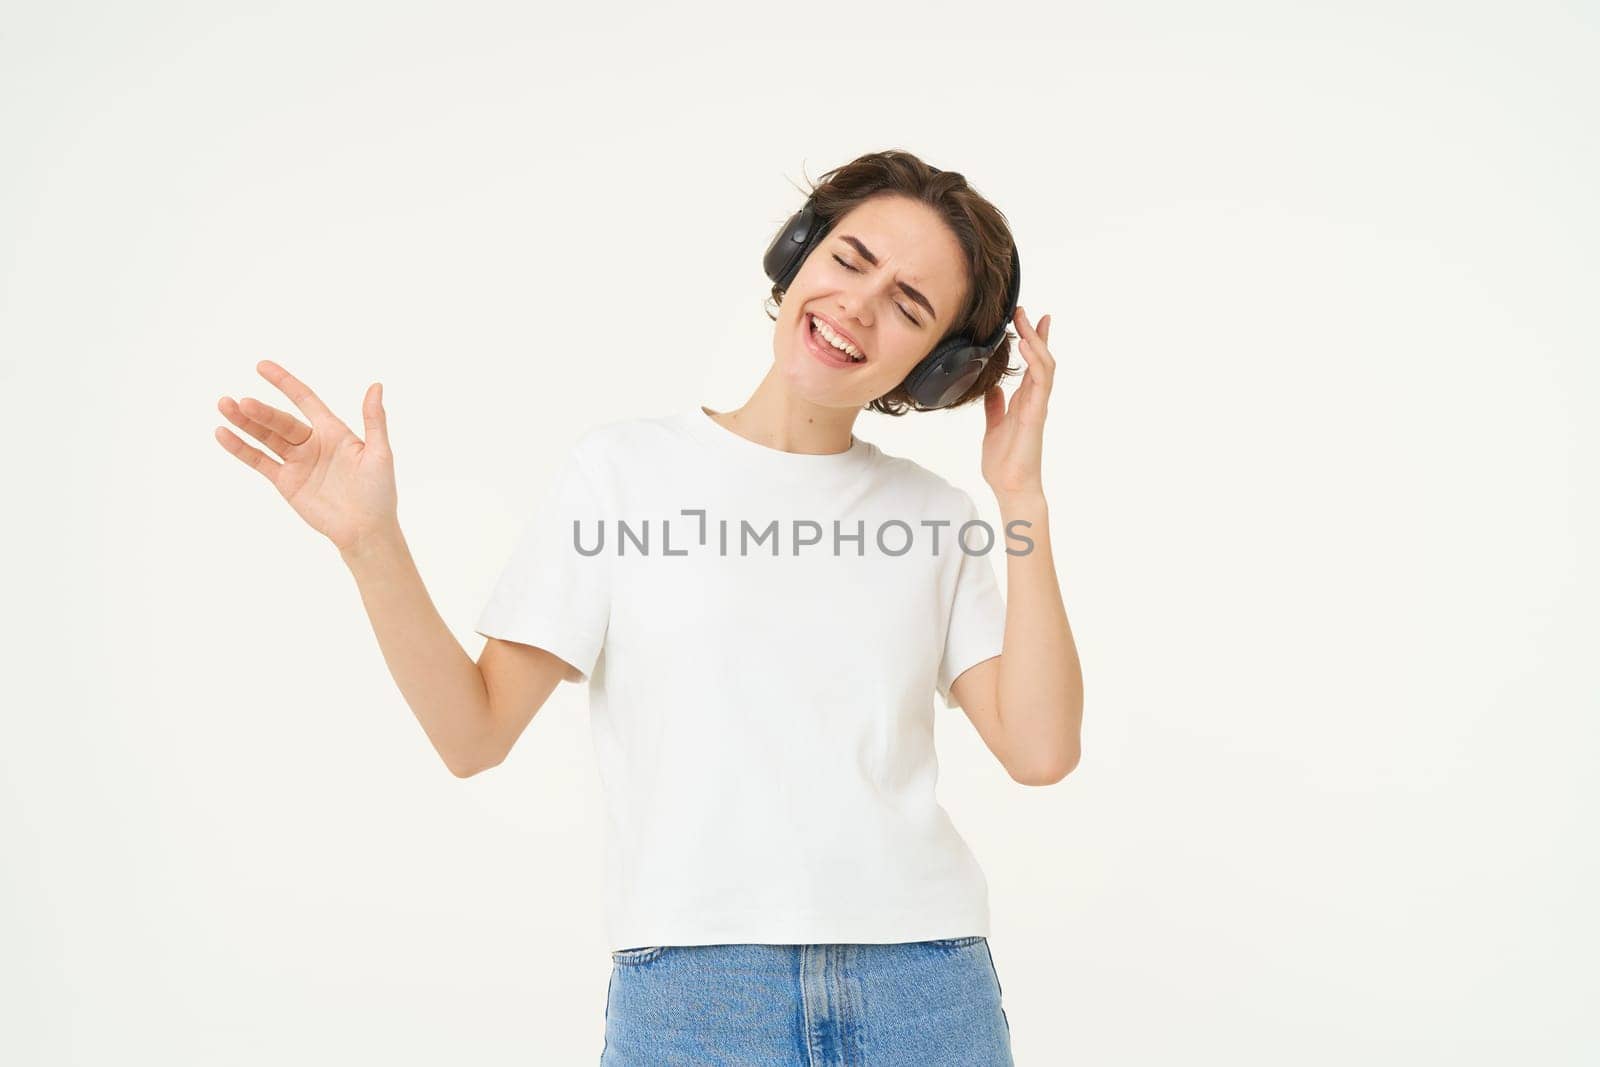 Happy girl dancing and having fun, listens to music in wireless headphones, stands over white background.